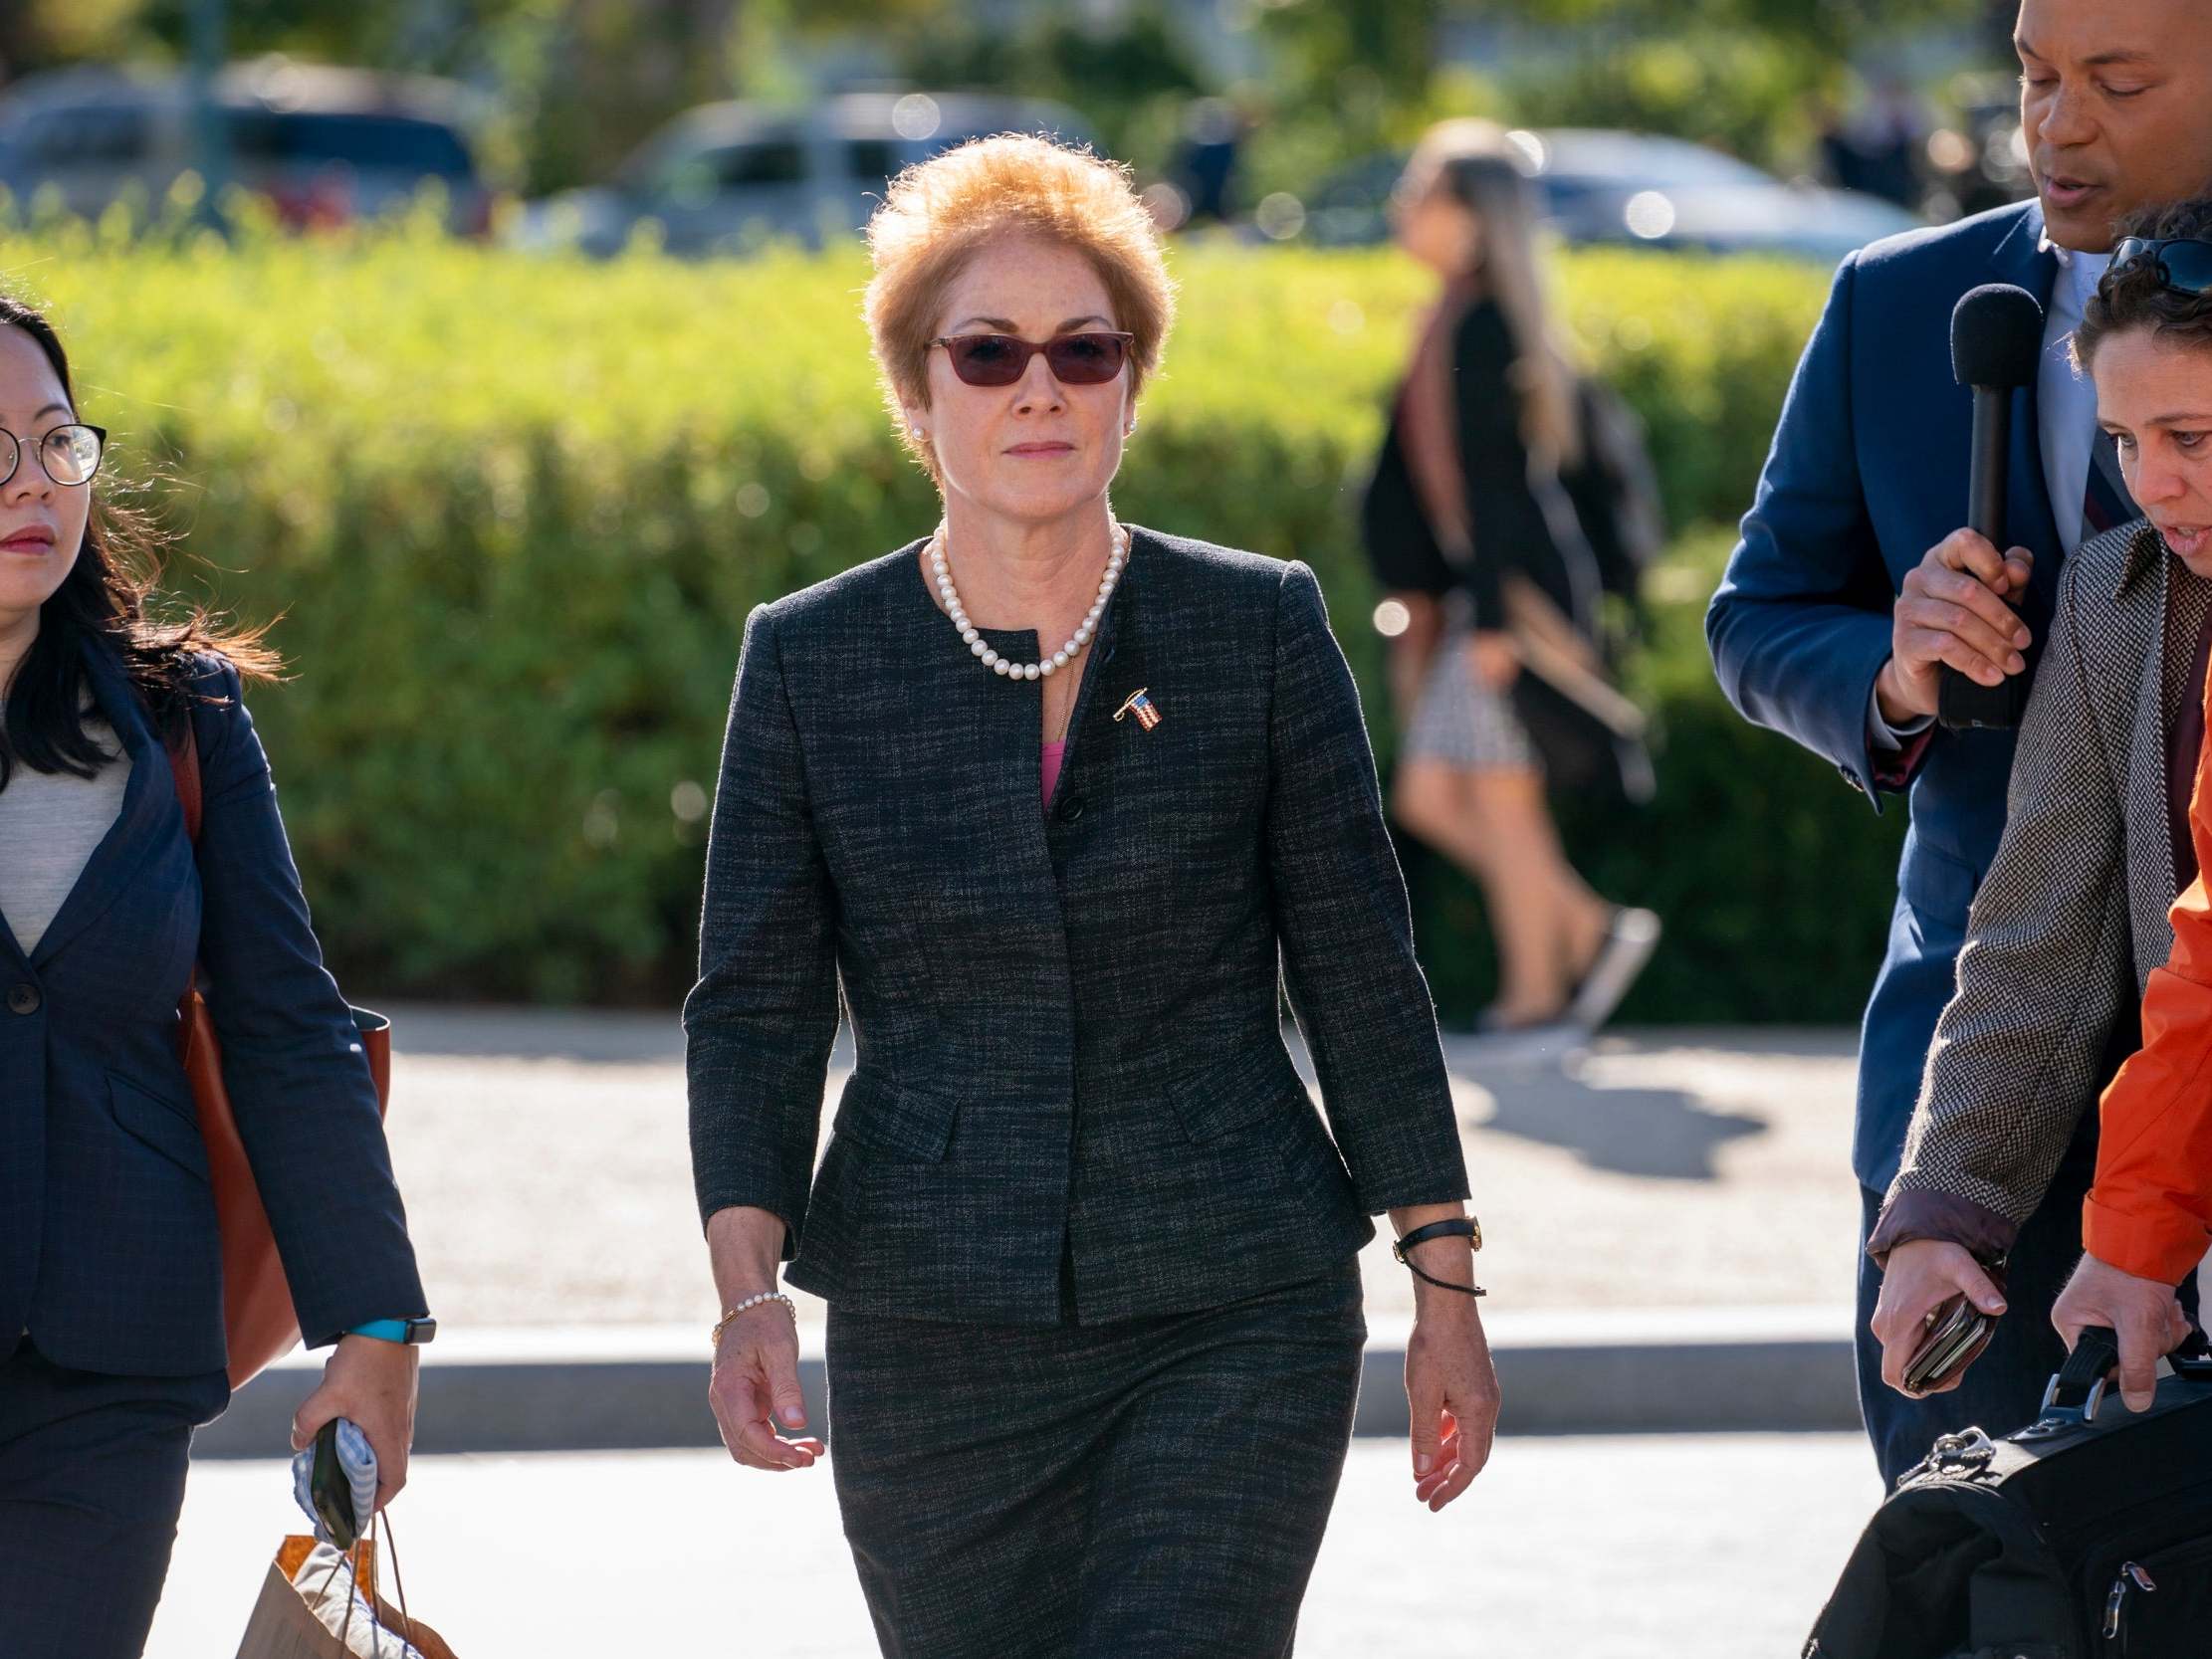 Former US ambassador to Ukraine Marie Yovanovitch arrives on Capitol Hill to testify in the impeachment inquiry